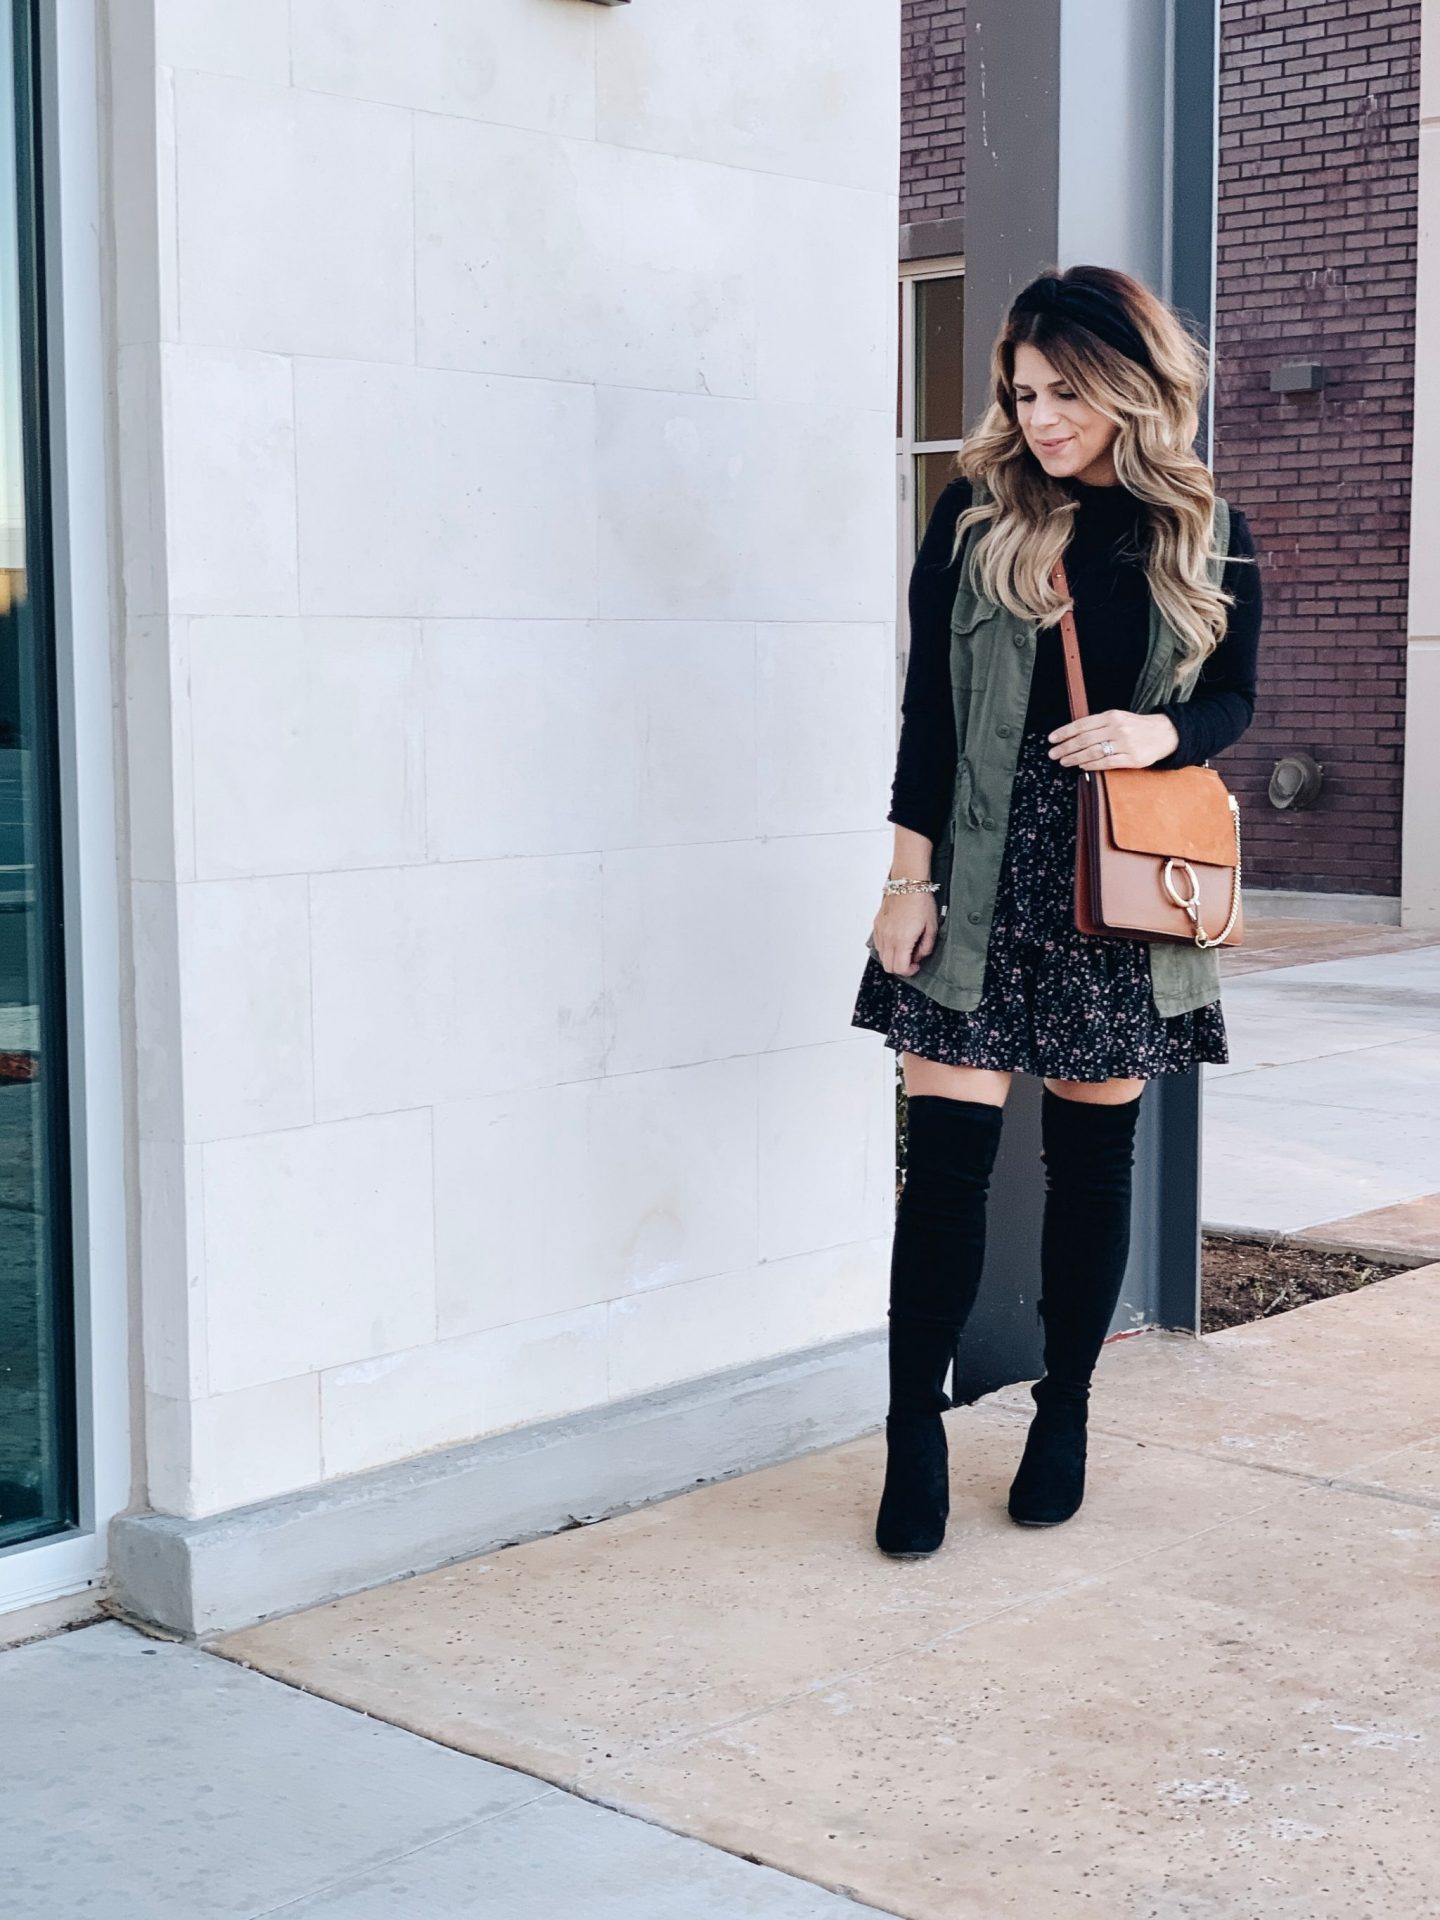 How To Style A Ruffle Skirt, Over The Knee Boots, Black Knot Headband, Chloe Faye Bag, Look for Less, Green Utility Vest 